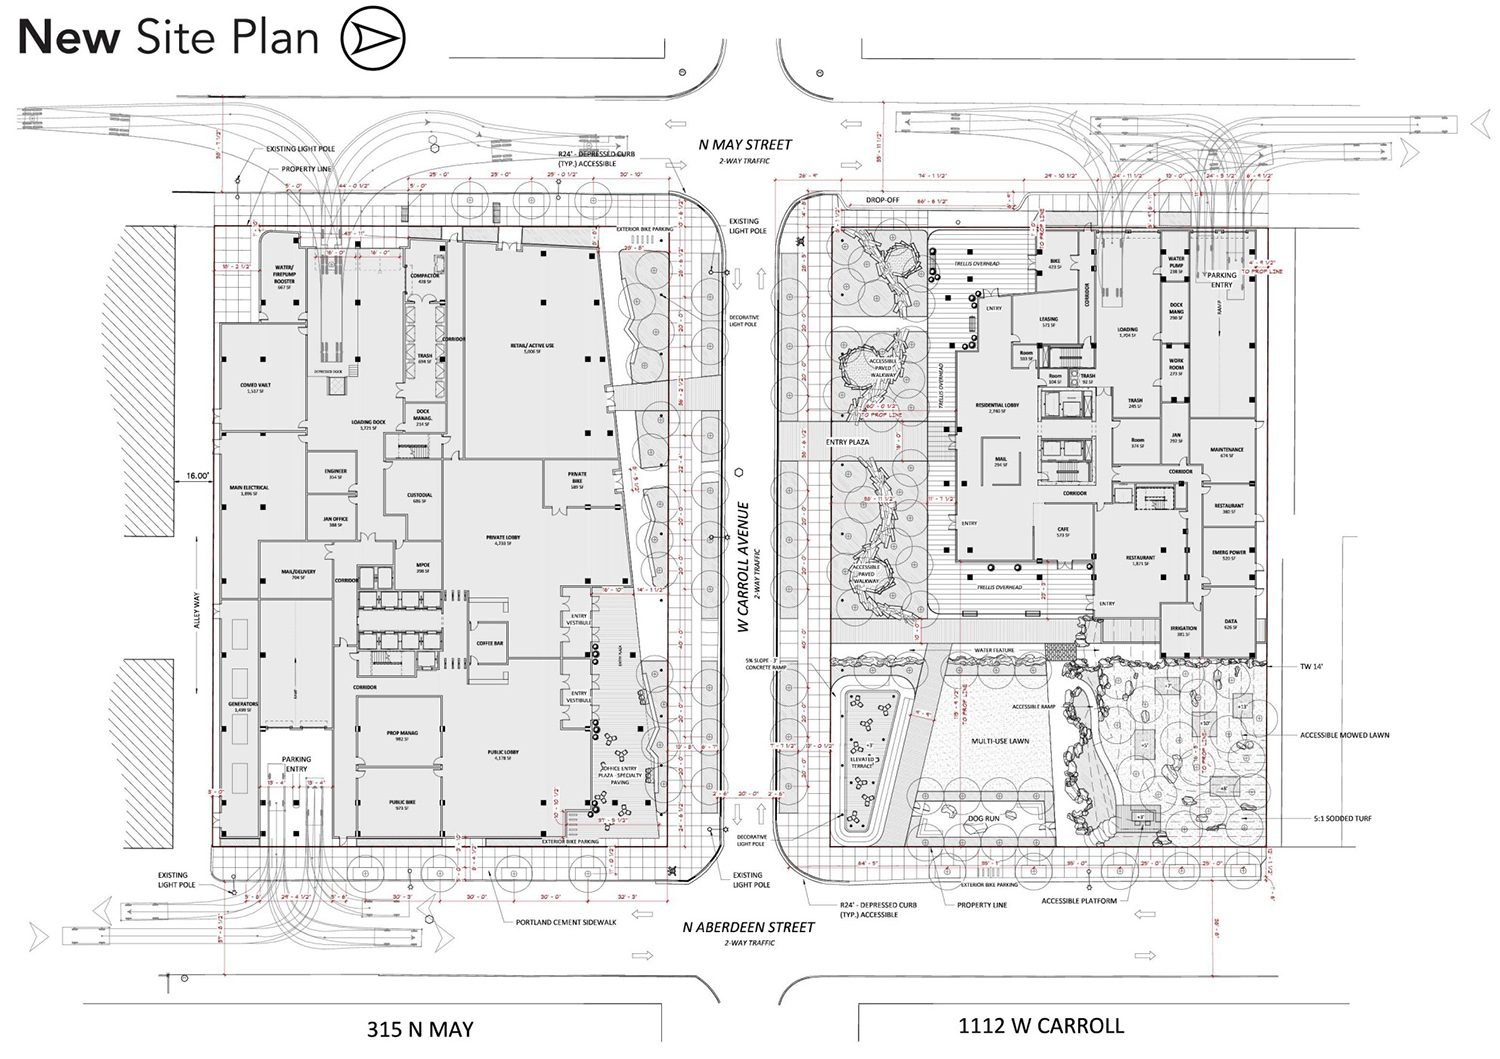 Site Plan of 1112 W Carroll Avenue and 315 N May Street. Drawing by ESG Architects